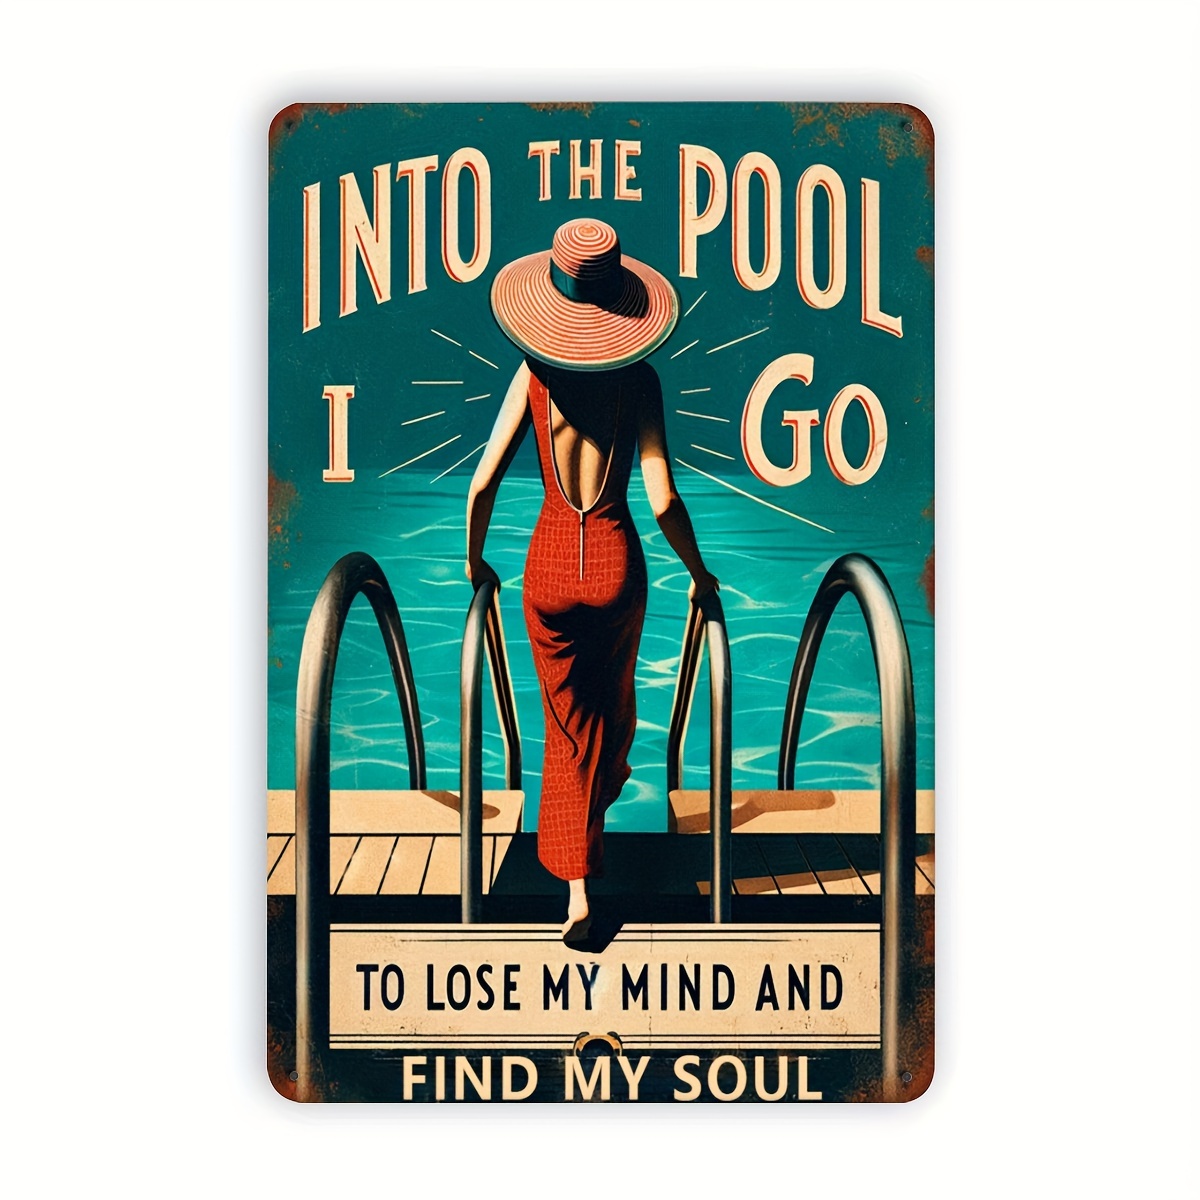 

Vintage Metal Tin Sign "into The Pool To Lose My Mind And Find My Soul" - Waterproof And Dustproof Outdoor Pool Wall Art Decor, Retro Plaque Engraving For Home, Patio, 8x12 Inches (20x30 Cm)